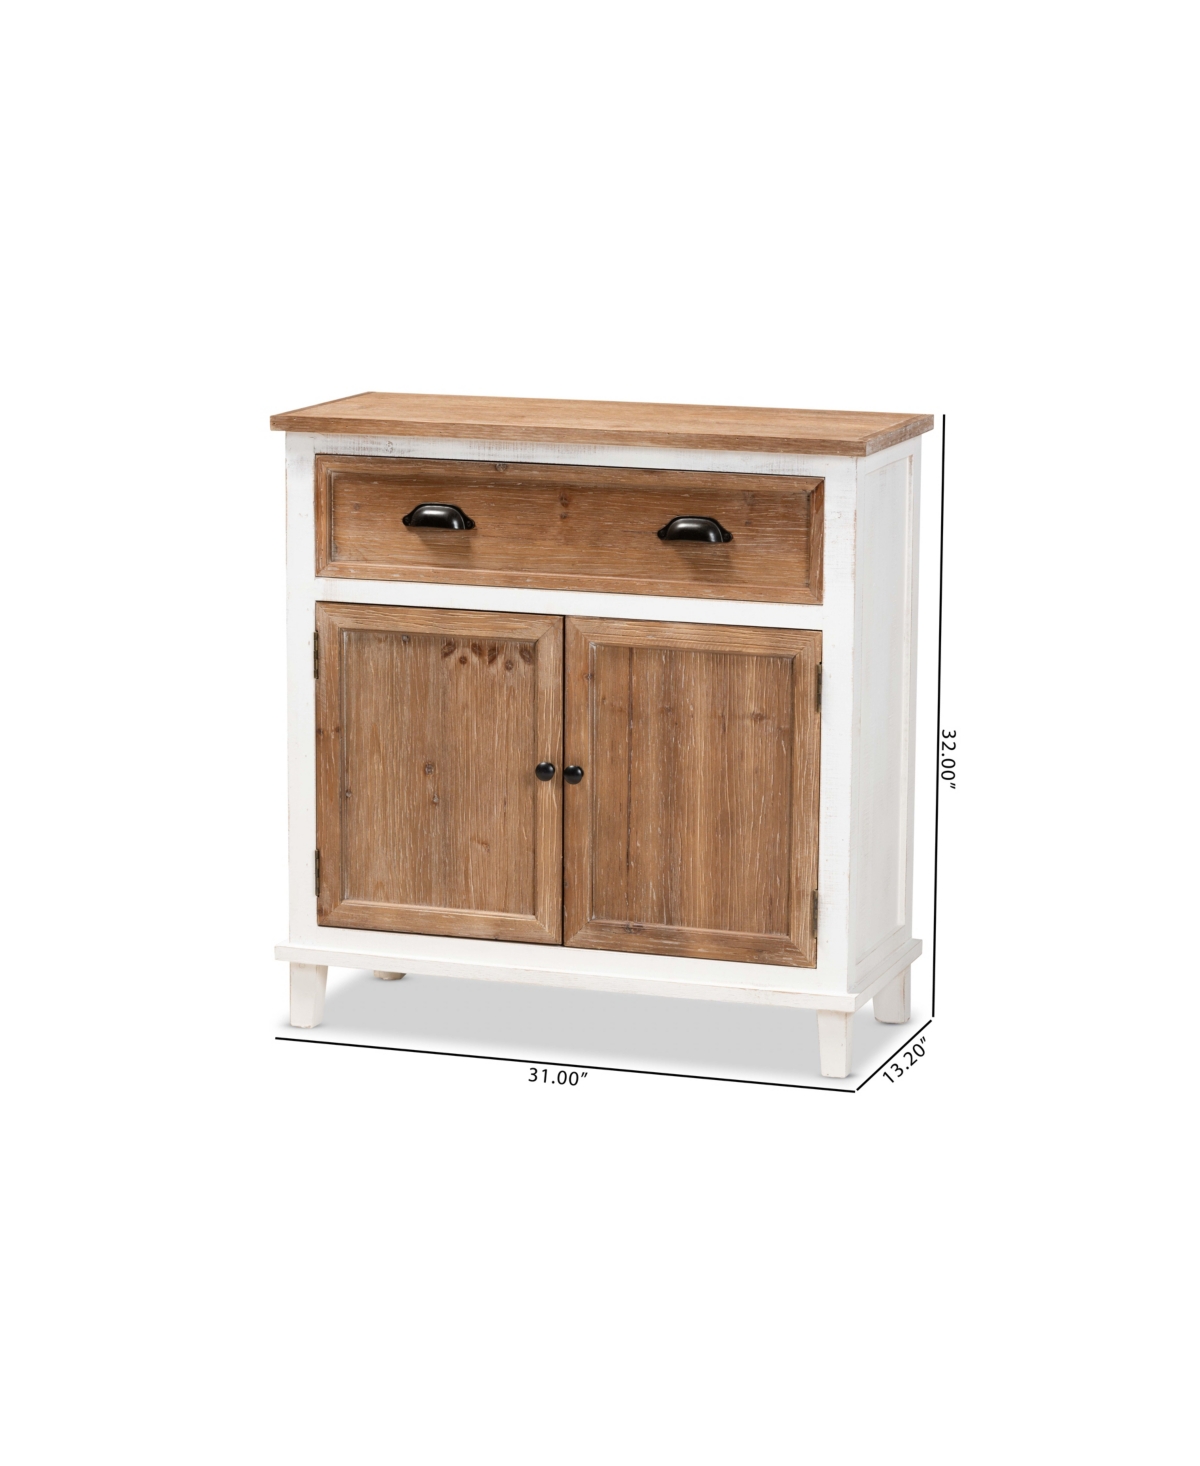 Shop Baxton Studio Glynn Rustic Farmhouse Weathered 31.9" Two-tone And Finished Wood 2-door Storage Cabinet In White,oak Brown